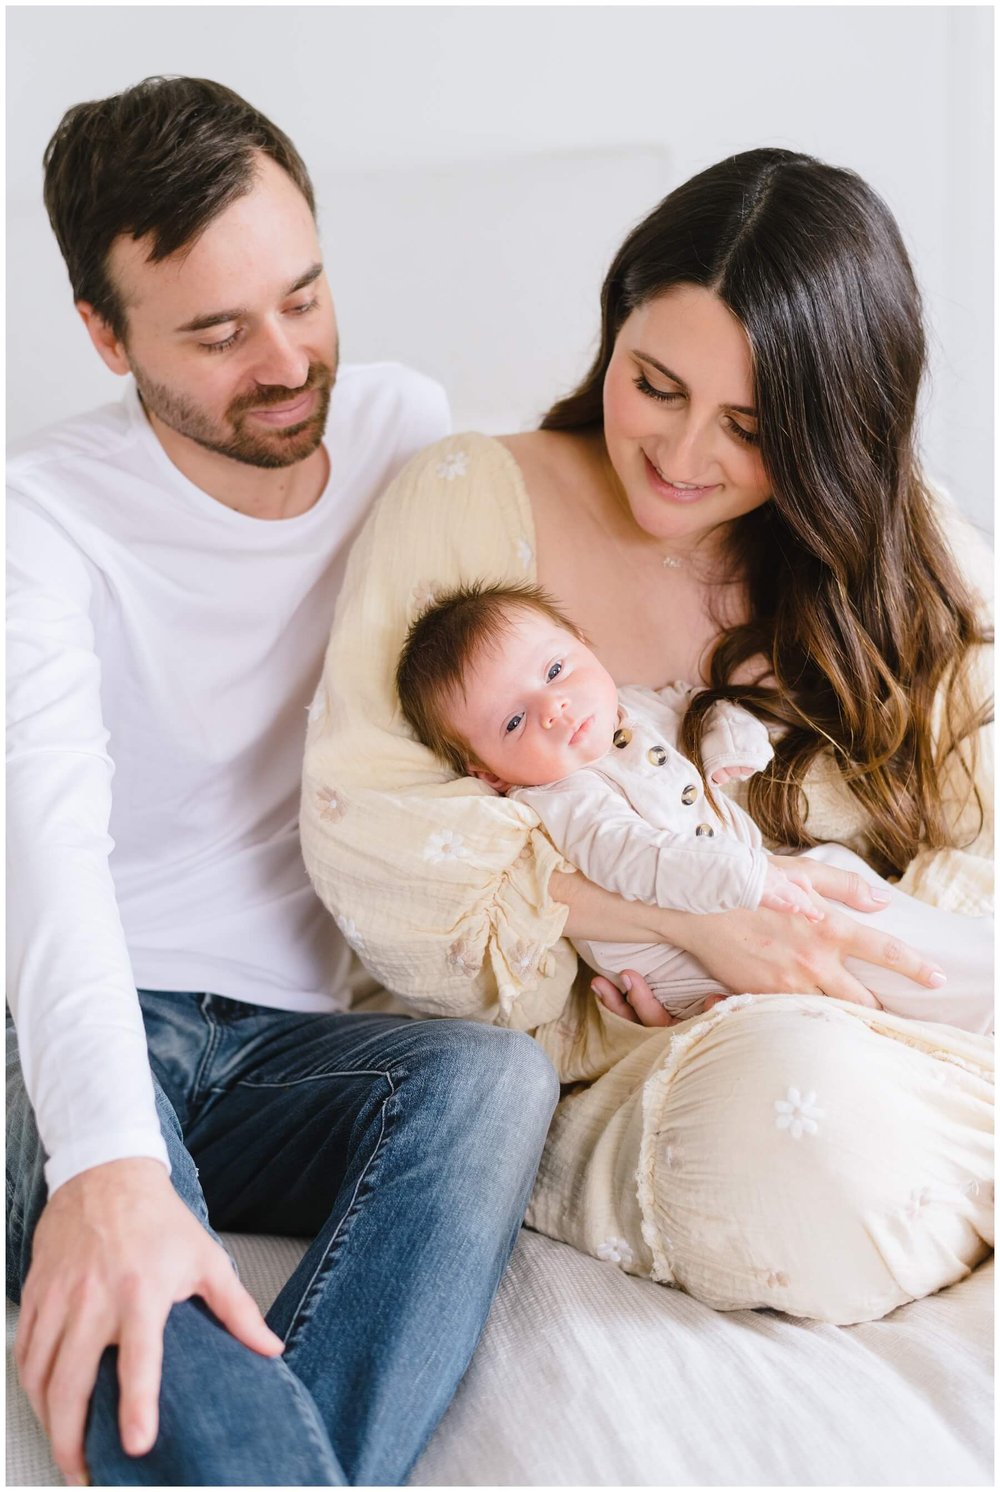 Mom holding newborn with dad next to her during newborn session | NKB Photo